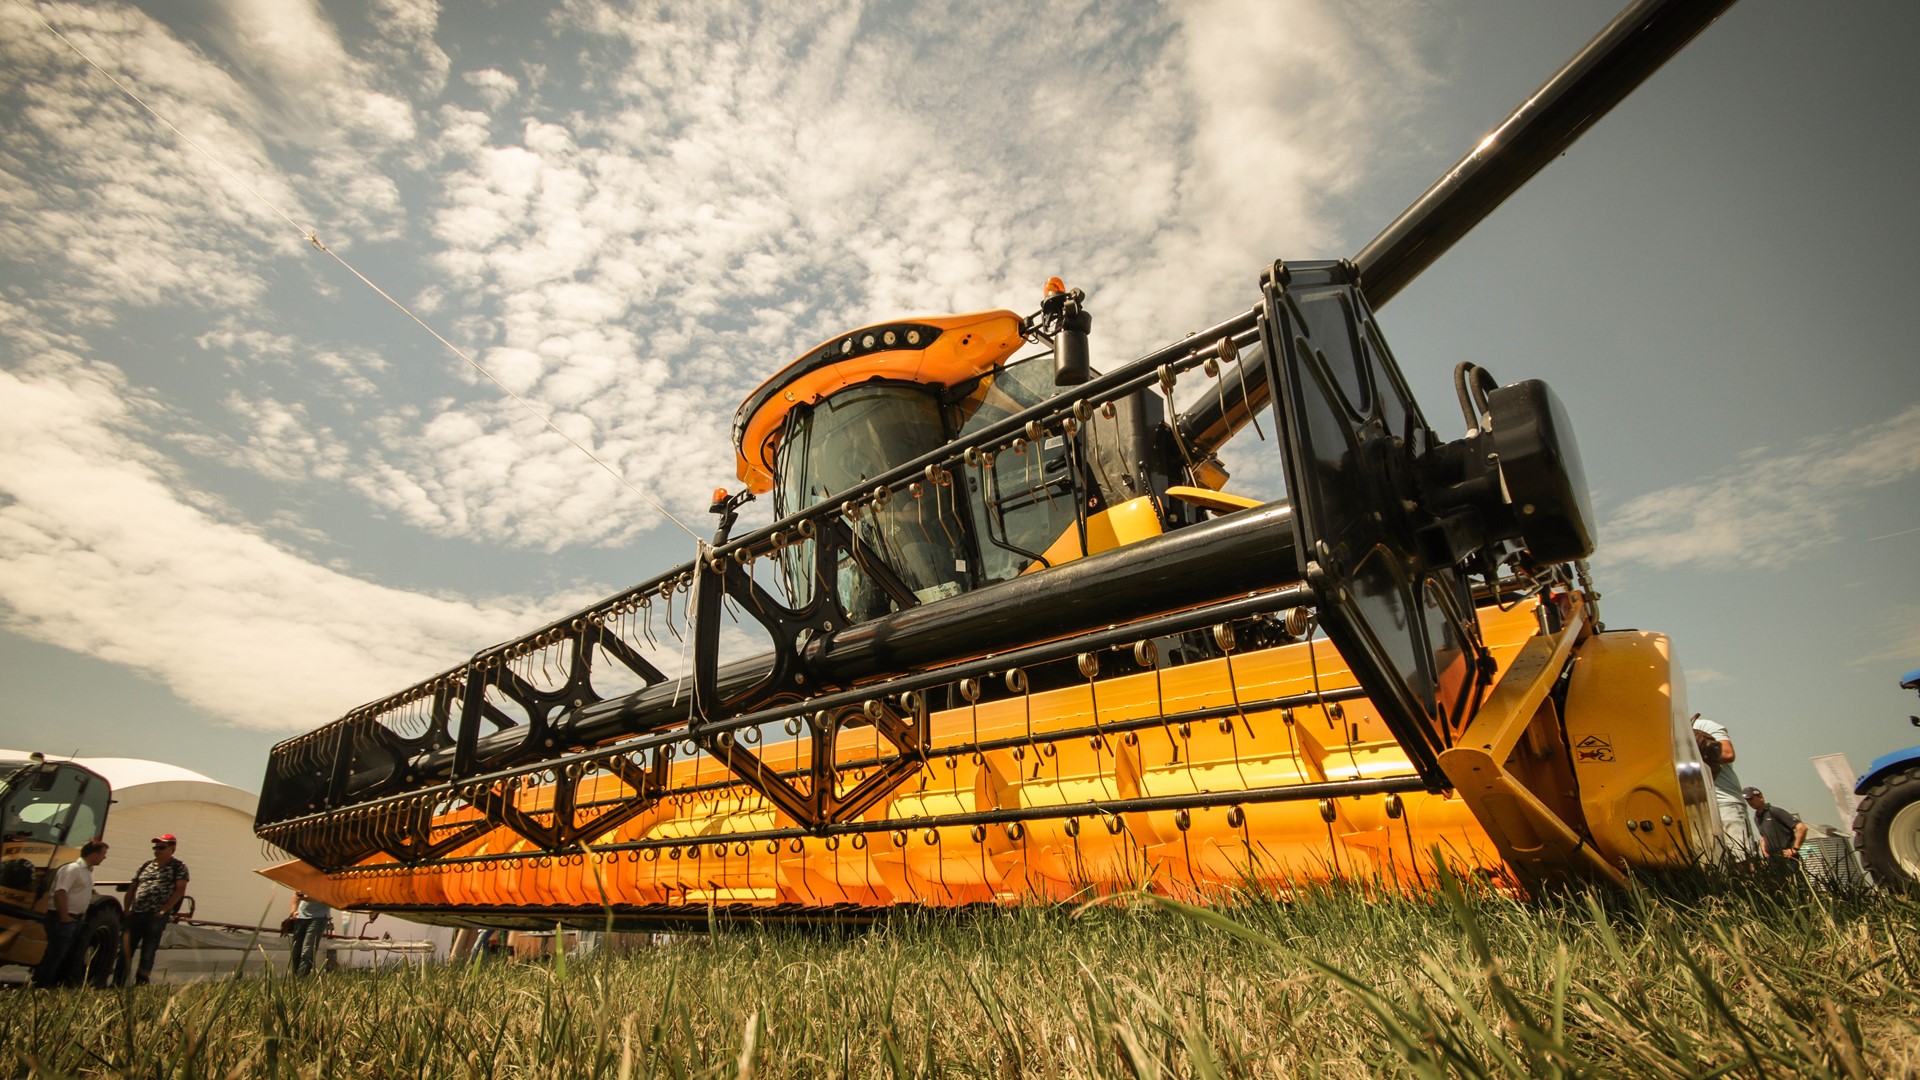 New Holland unveiled the new and upgraded CX6 Series combine harvesters for the Russian market